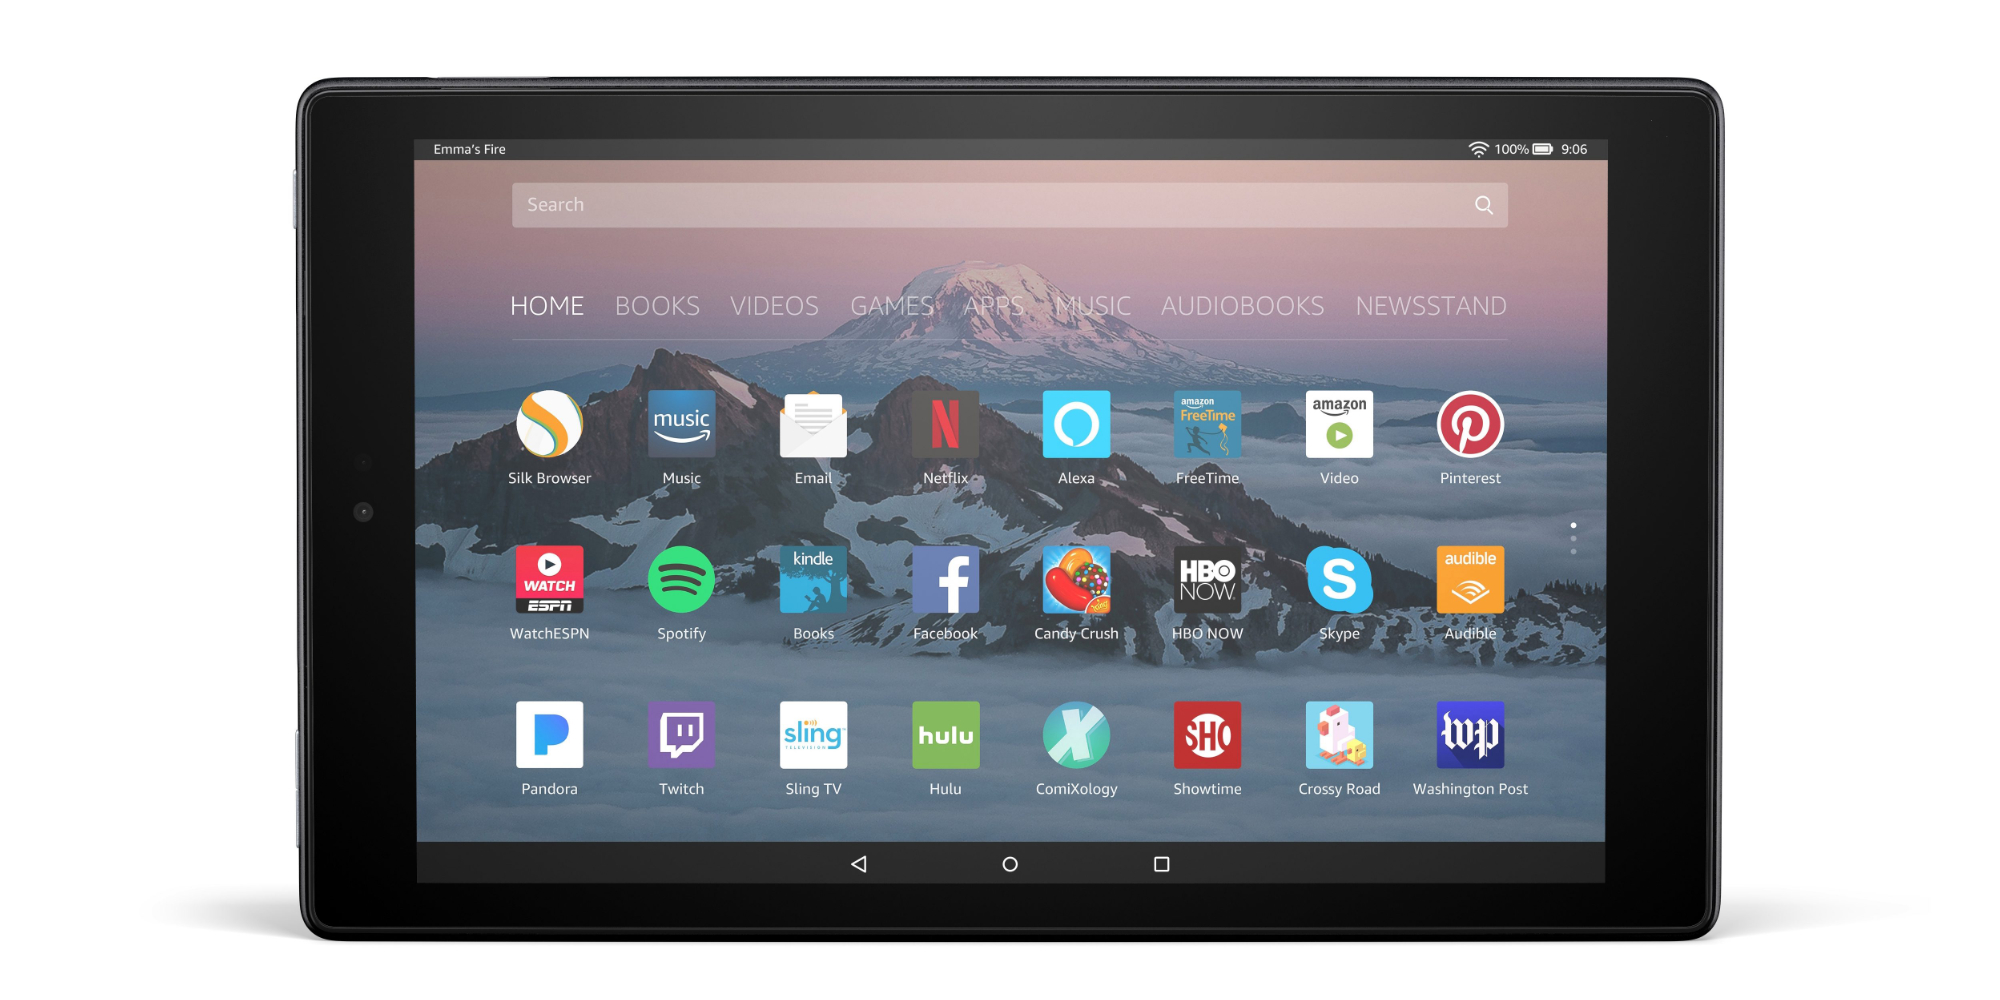 The Amazon 10-inch Fire HD 32GB Tablet offers 10-hour battery life